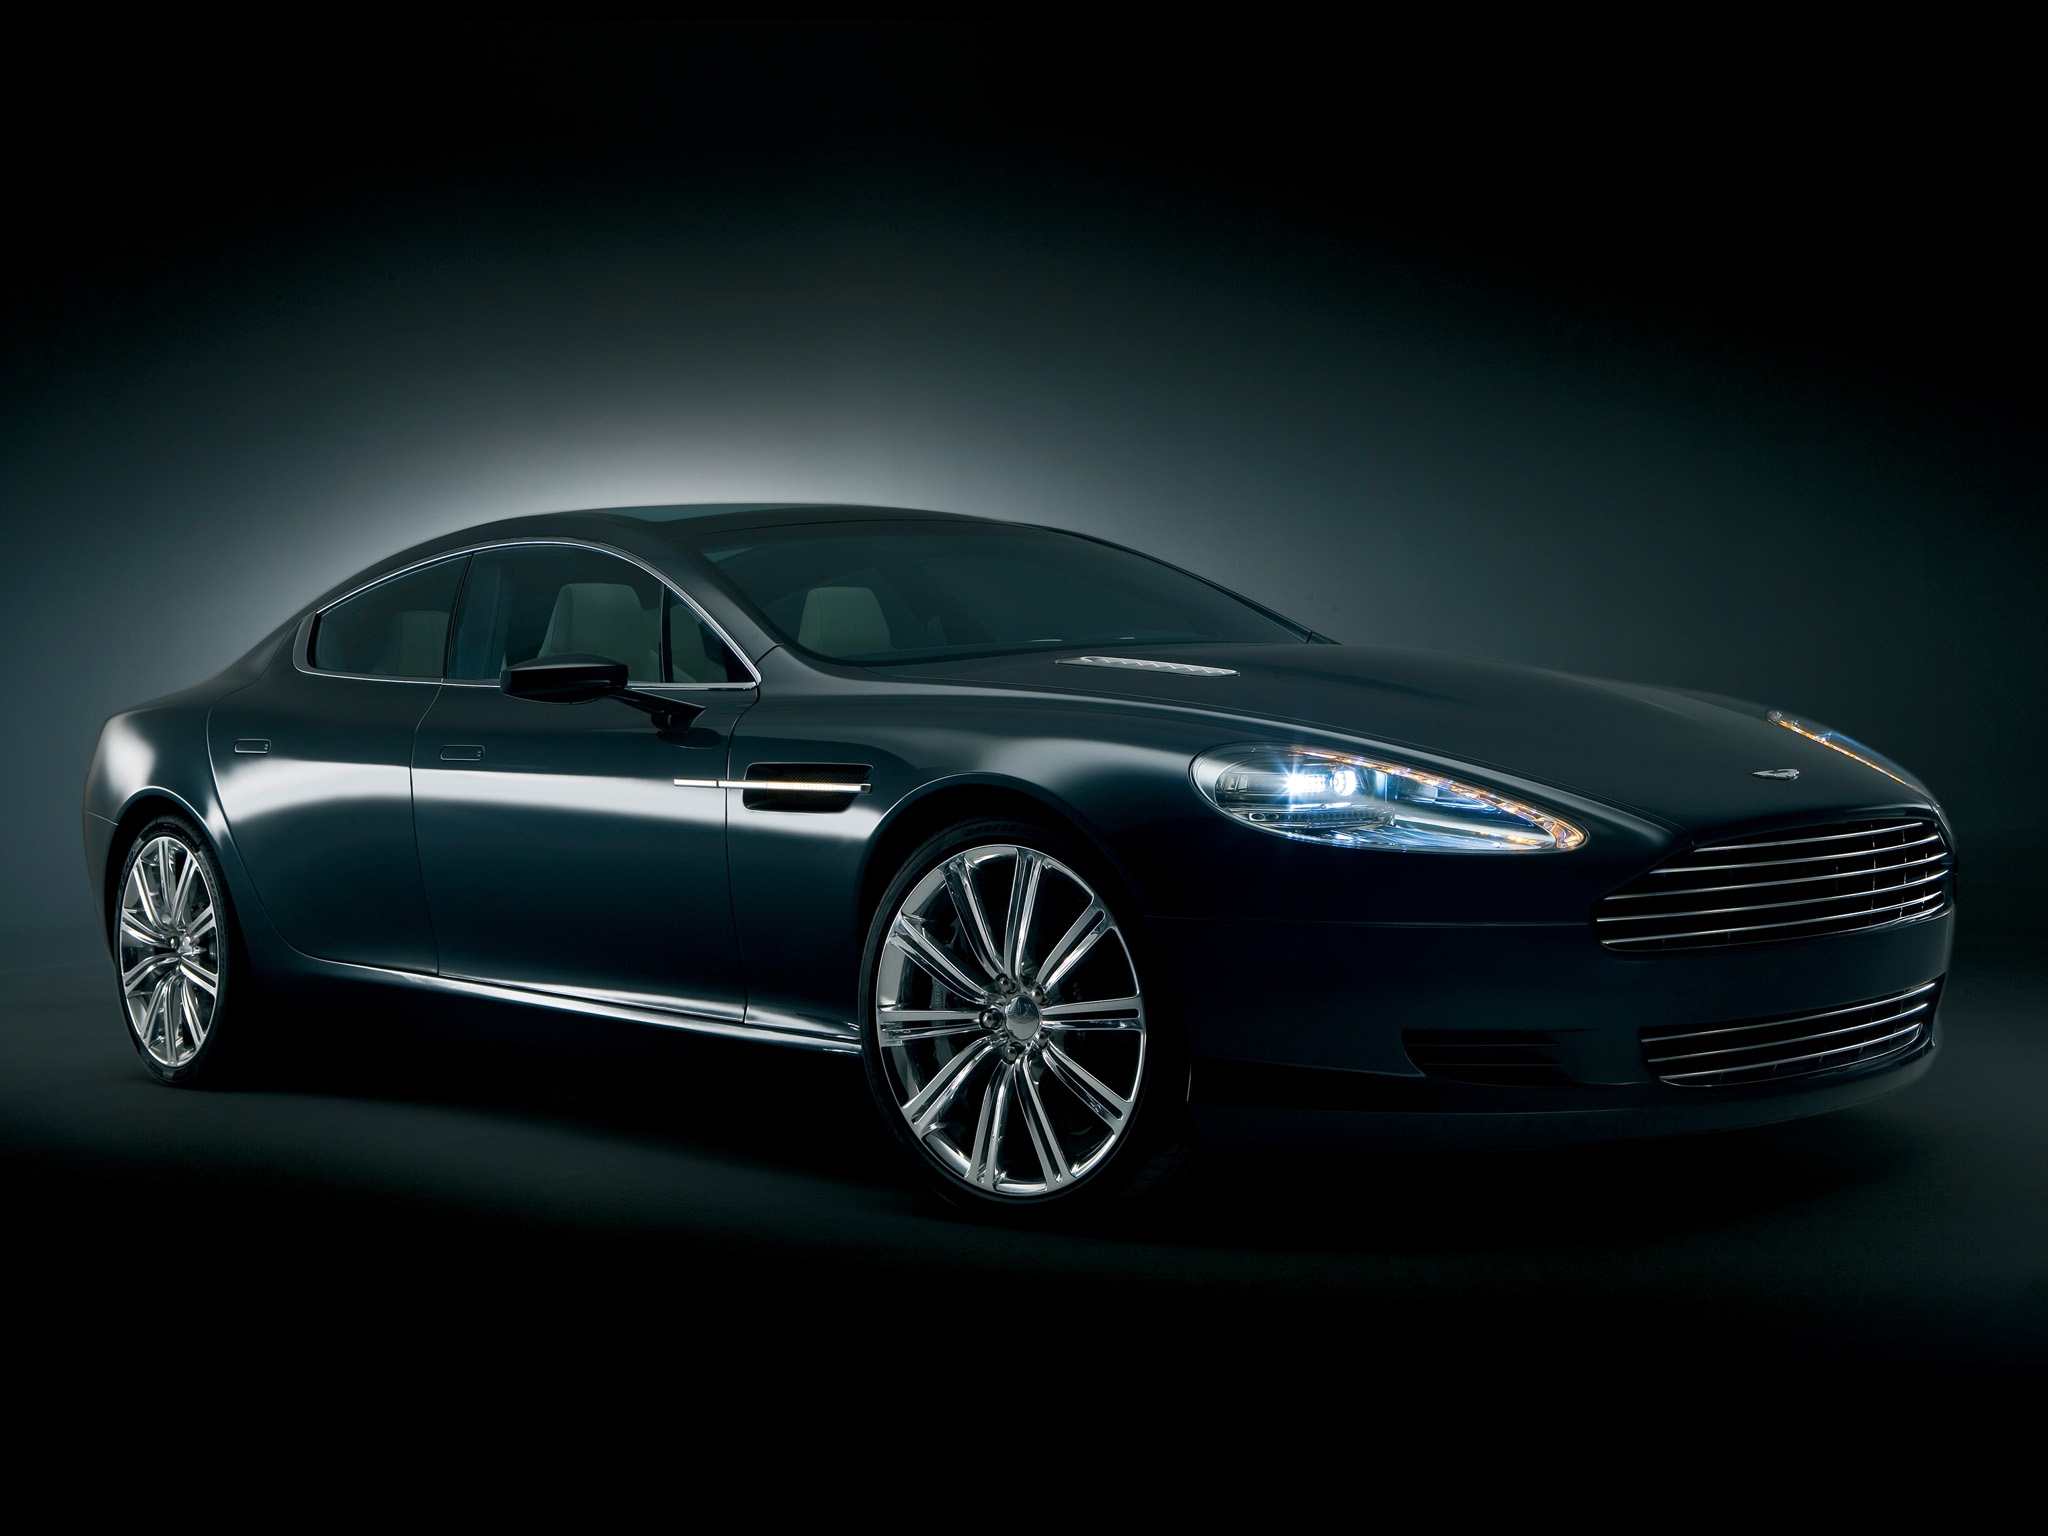 cars, black, aston martin, side view, style, concept car, 2006, rapide lock screen backgrounds